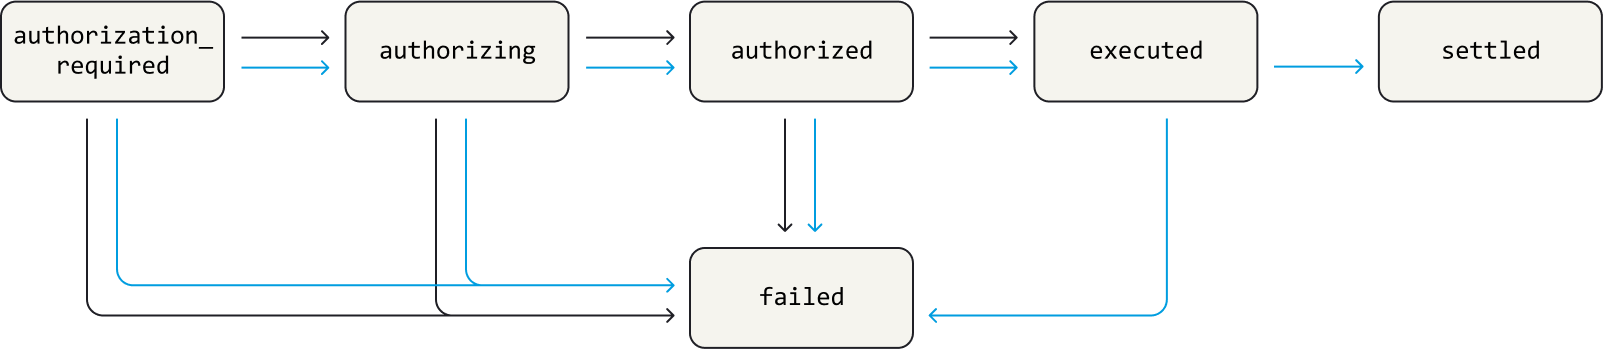 Blue arrows are possible status flows for payments into a merchant account. 

Black arrows are possible statuses for payments into an external account.